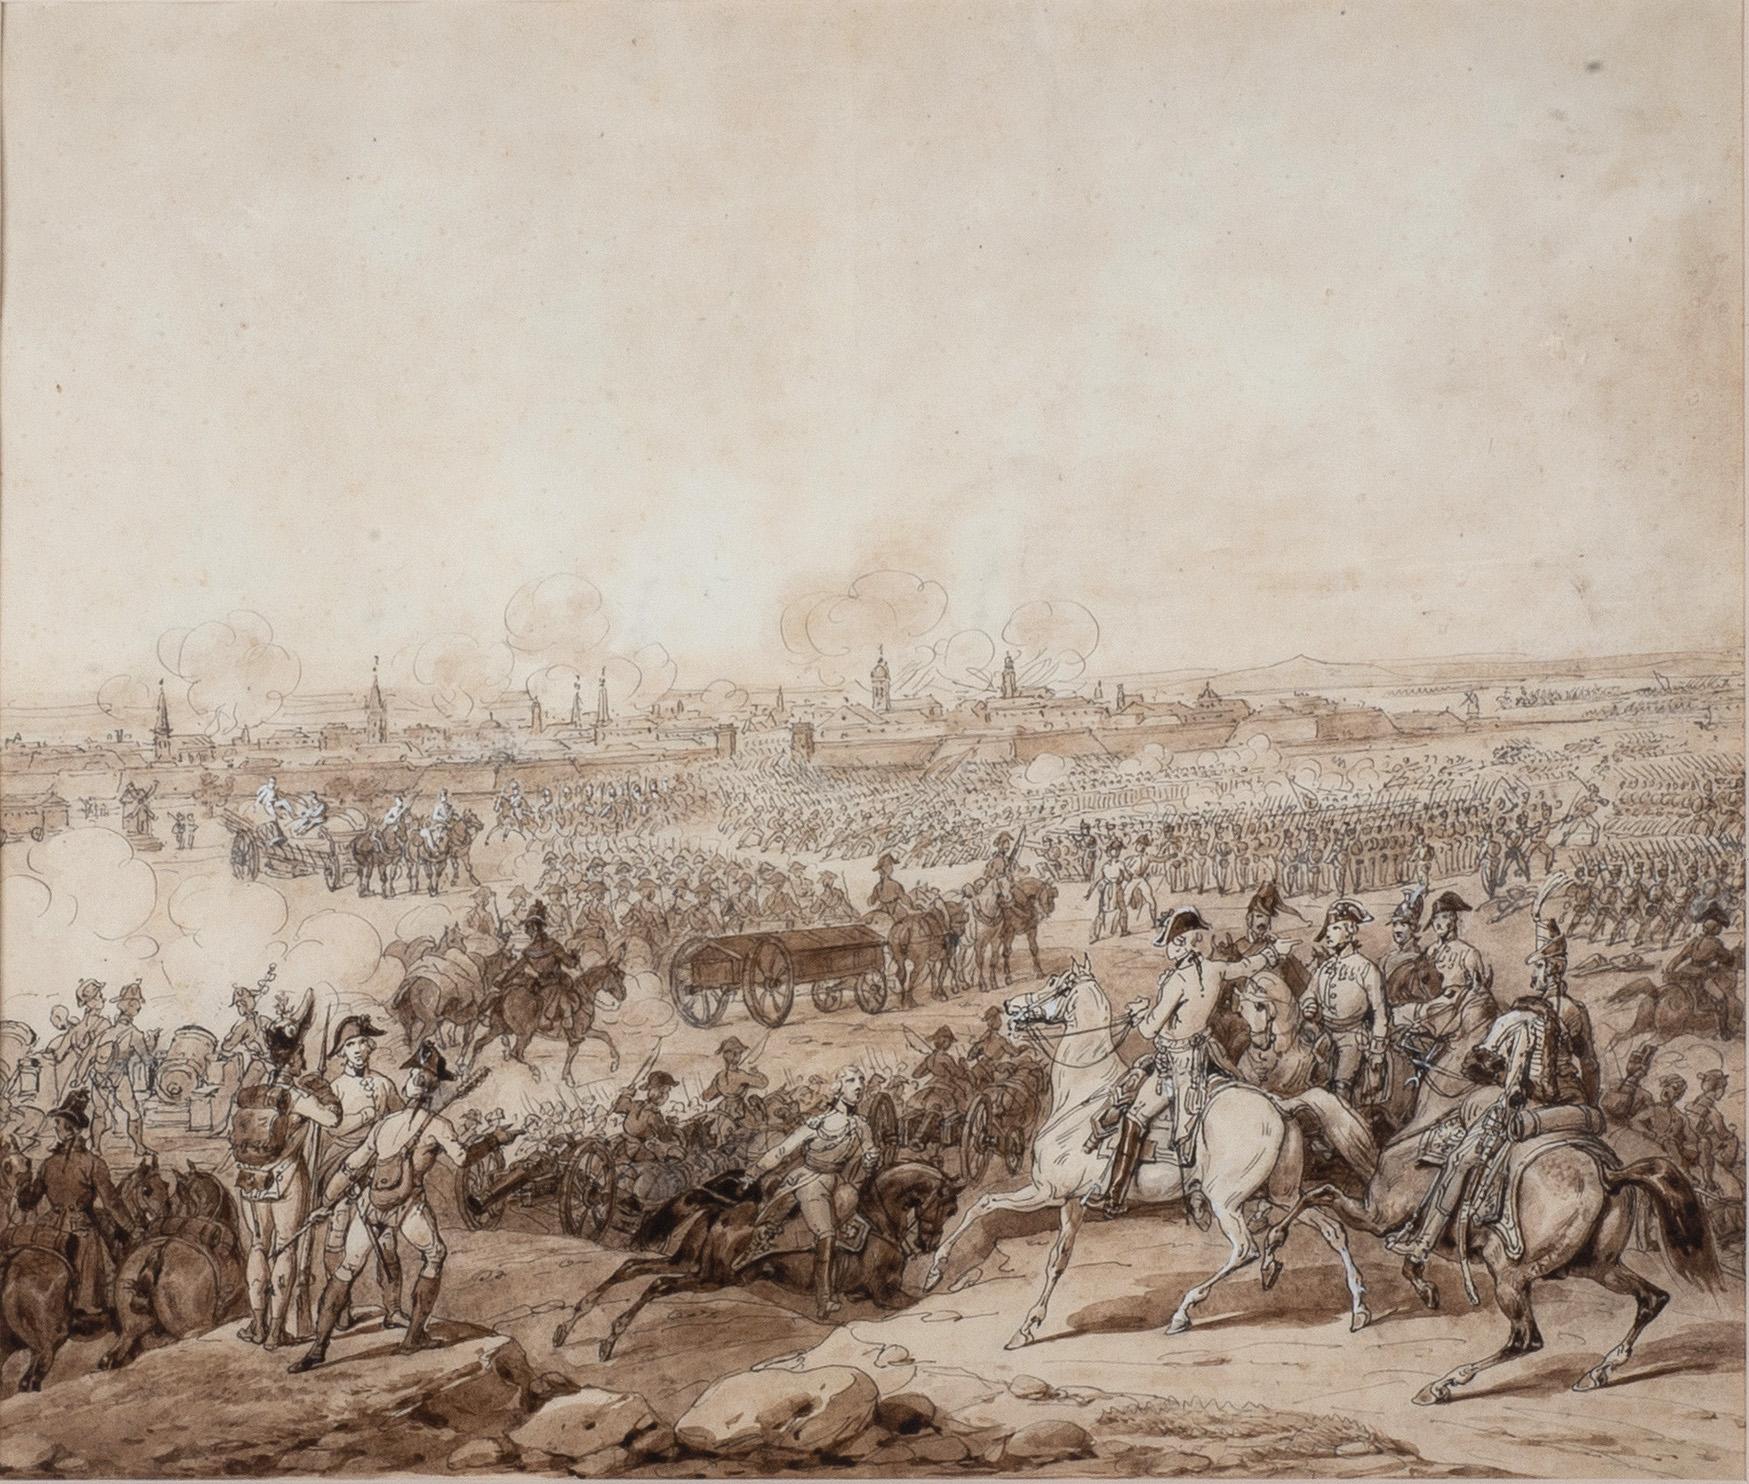 Drawing of a revolutionary battlefield attributed to Hippolyte Bellange, representing the End of the Siege of Lille by the Duke Albert of Saxe on the 8th of October 1792 (the French storm out of the city) according to manuscript legend.
Ink and wash